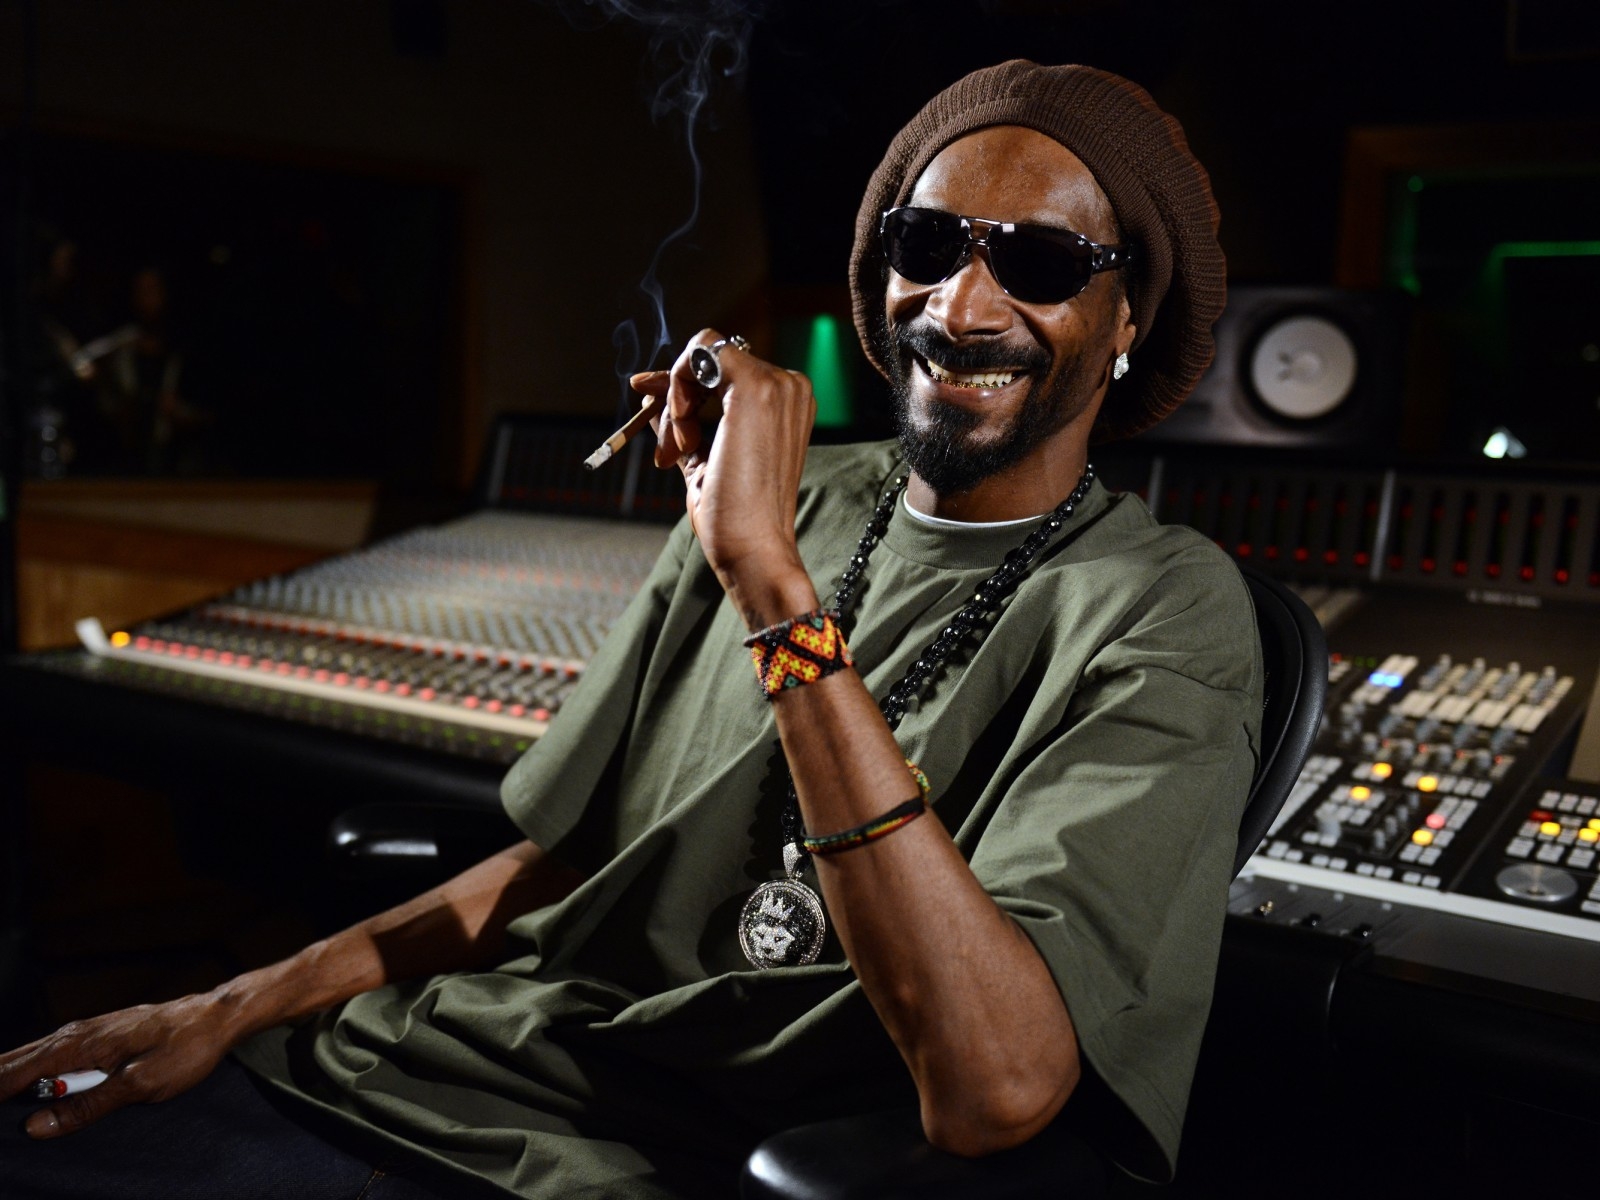 Snoop Dogg Smile for 1600 x 1200 resolution